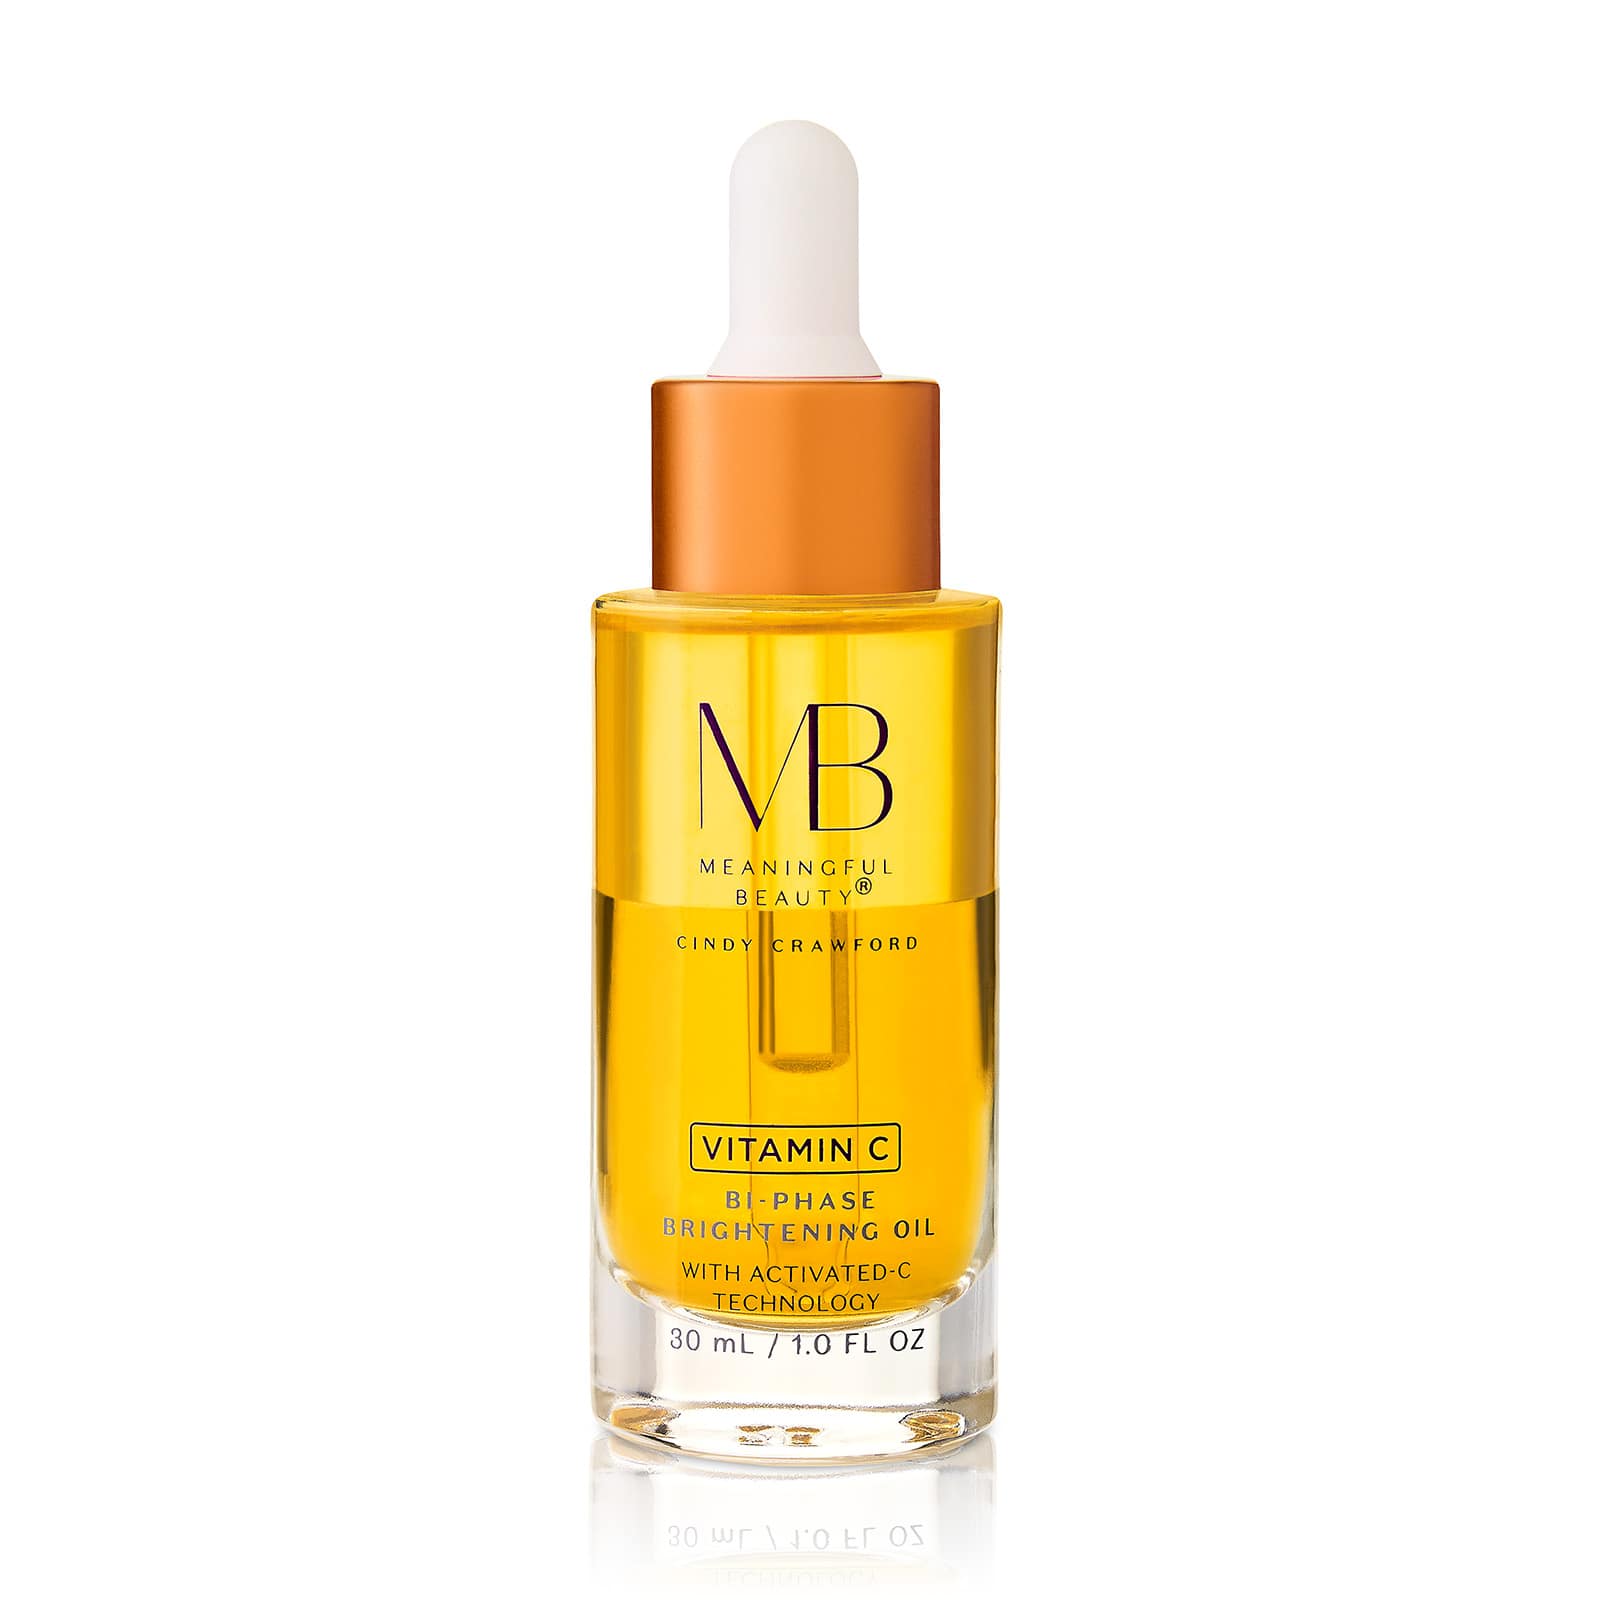 Vitamin C Bi-Phase Brightening Oil with Activated-C Technology